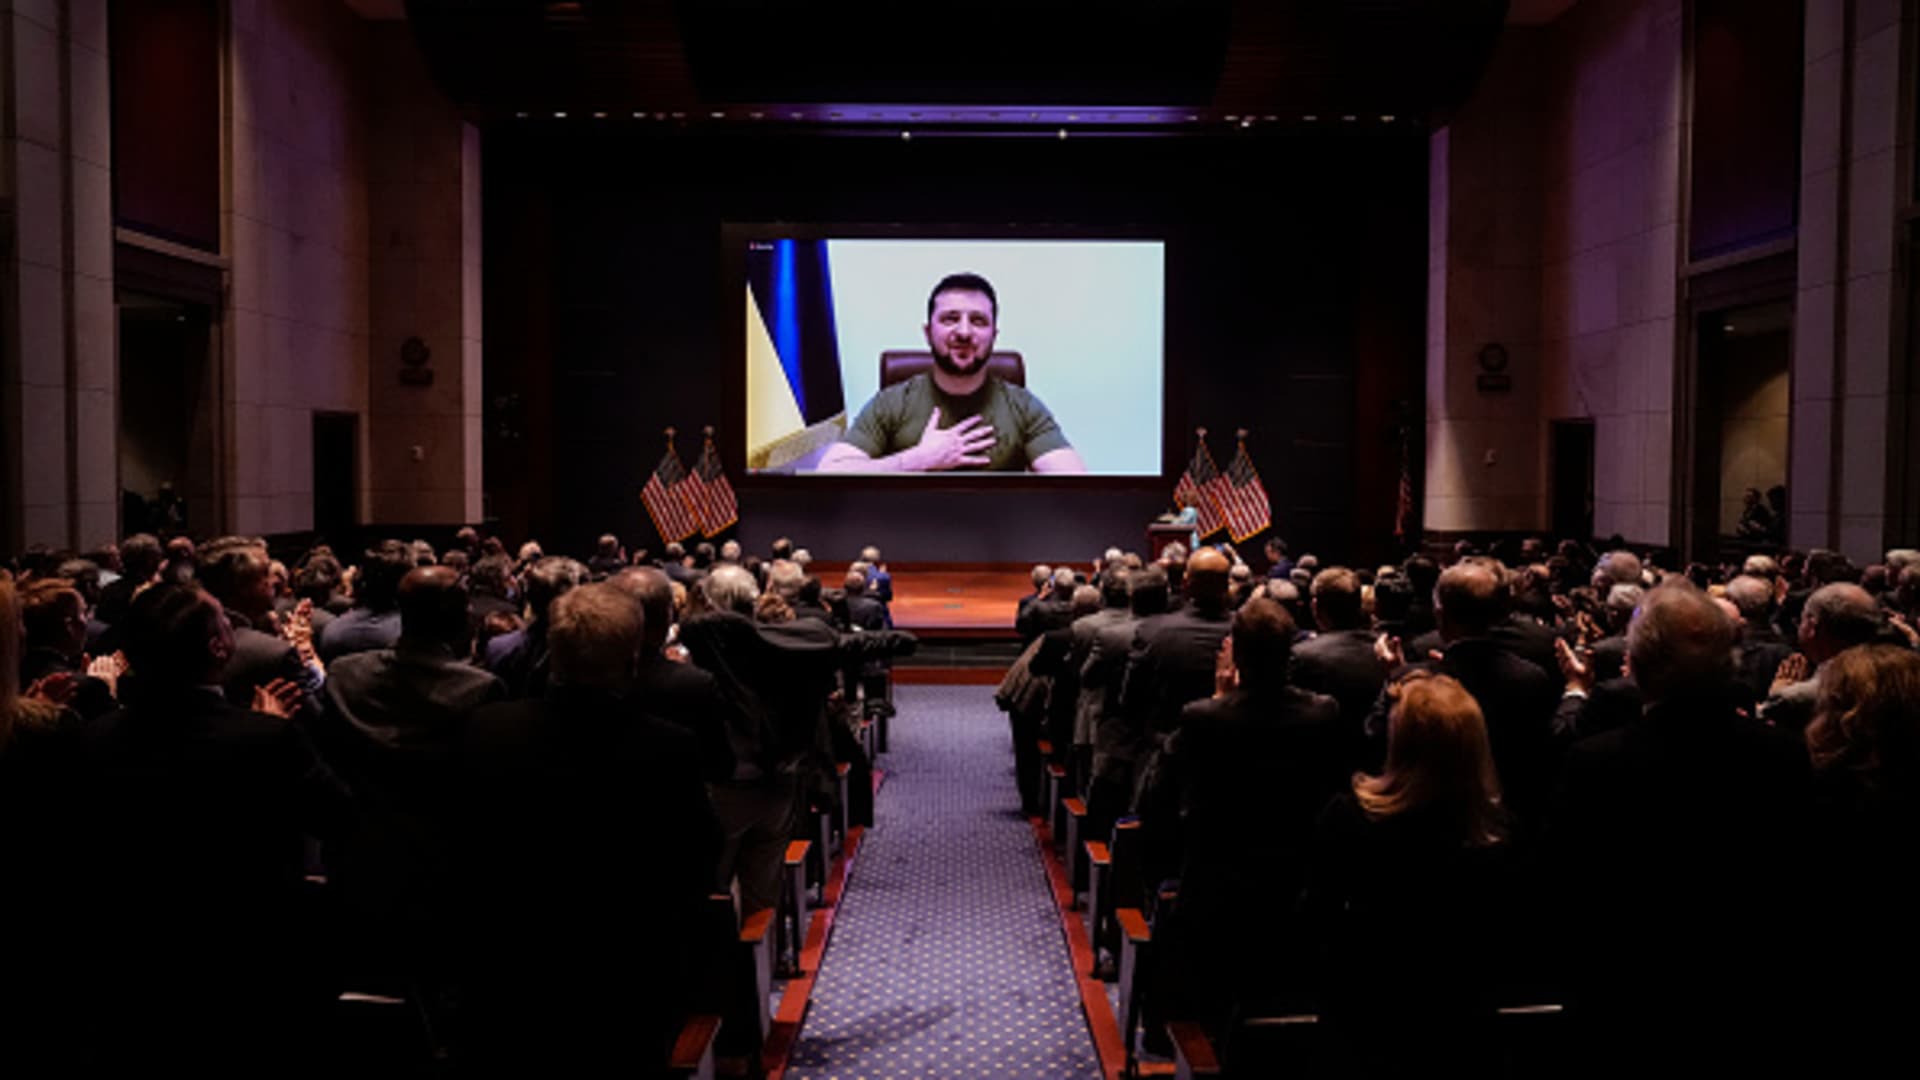 Ukrainian President Volodymyr Zelenskyy delivers a virtual address to Congress at the U.S. Capitol on March 16, 2022 in Washington, DC. Zelenskyy addressed Congress as Ukraine continues to defend itself from an ongoing Russian invasion.